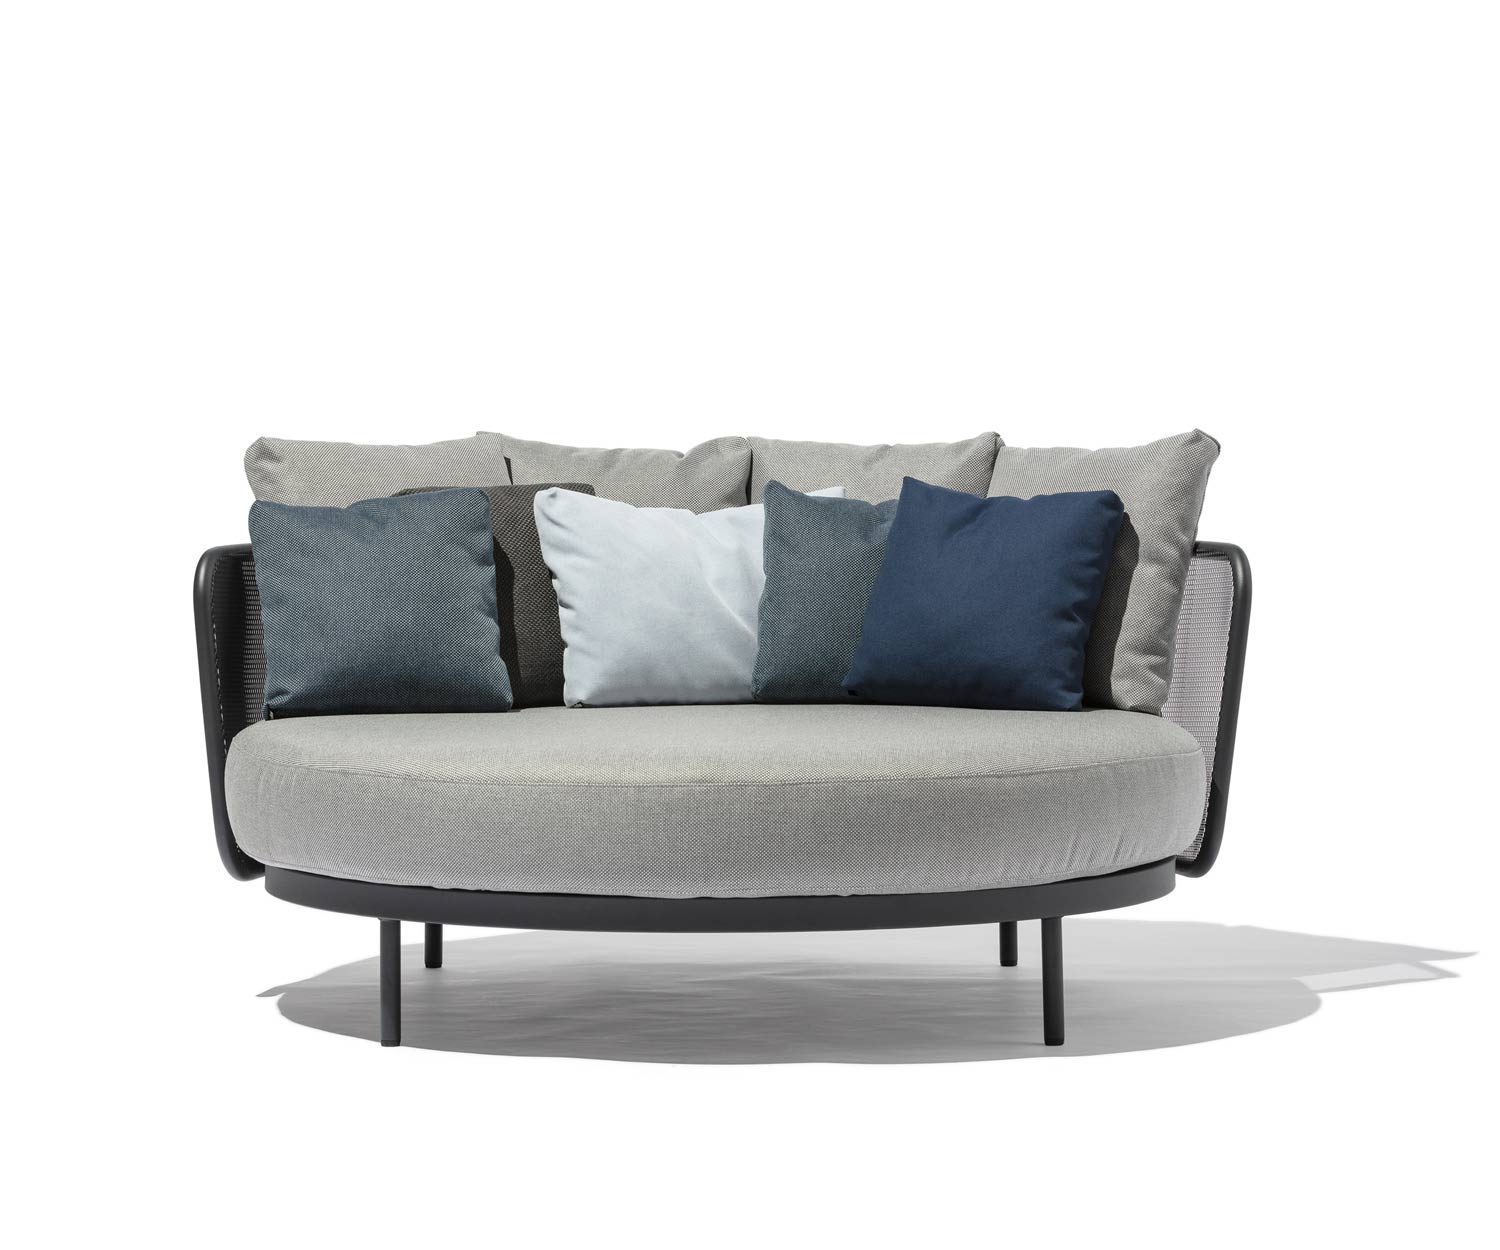 Todus Baza Design Lounge Daybed Rond met kussenset